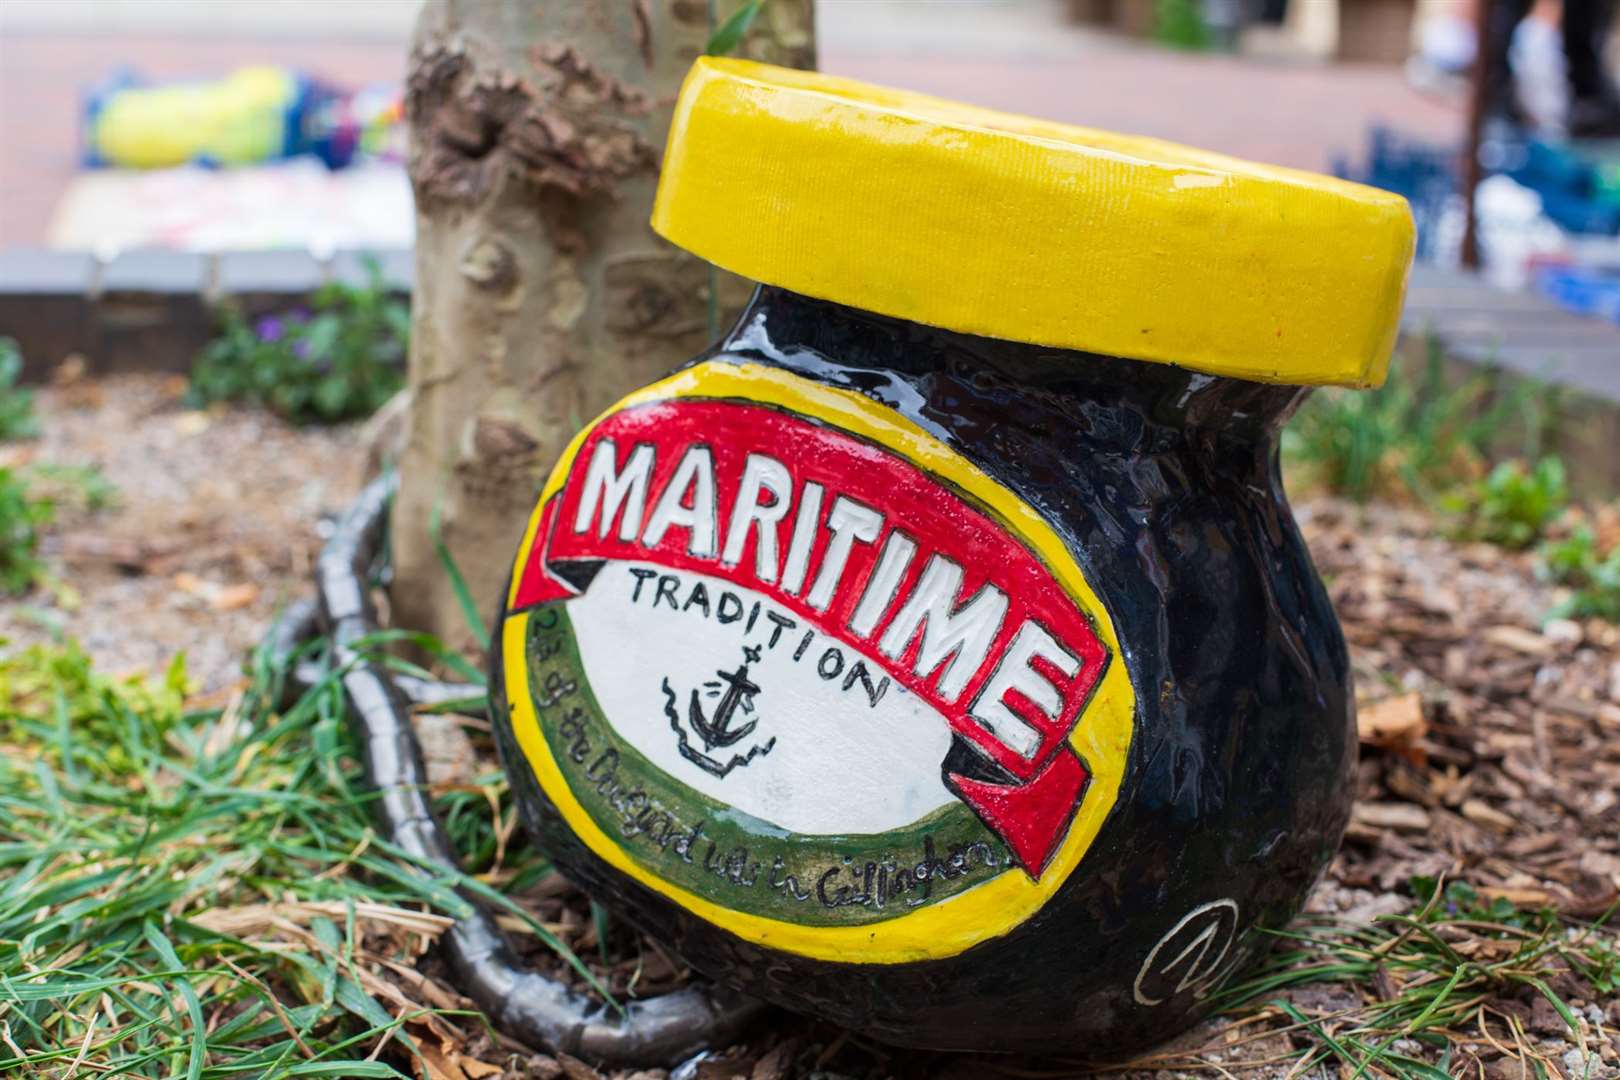 Love it or hate it, this Marmite-looking jar is part of the arts trail Picture: Nikki Price Photography